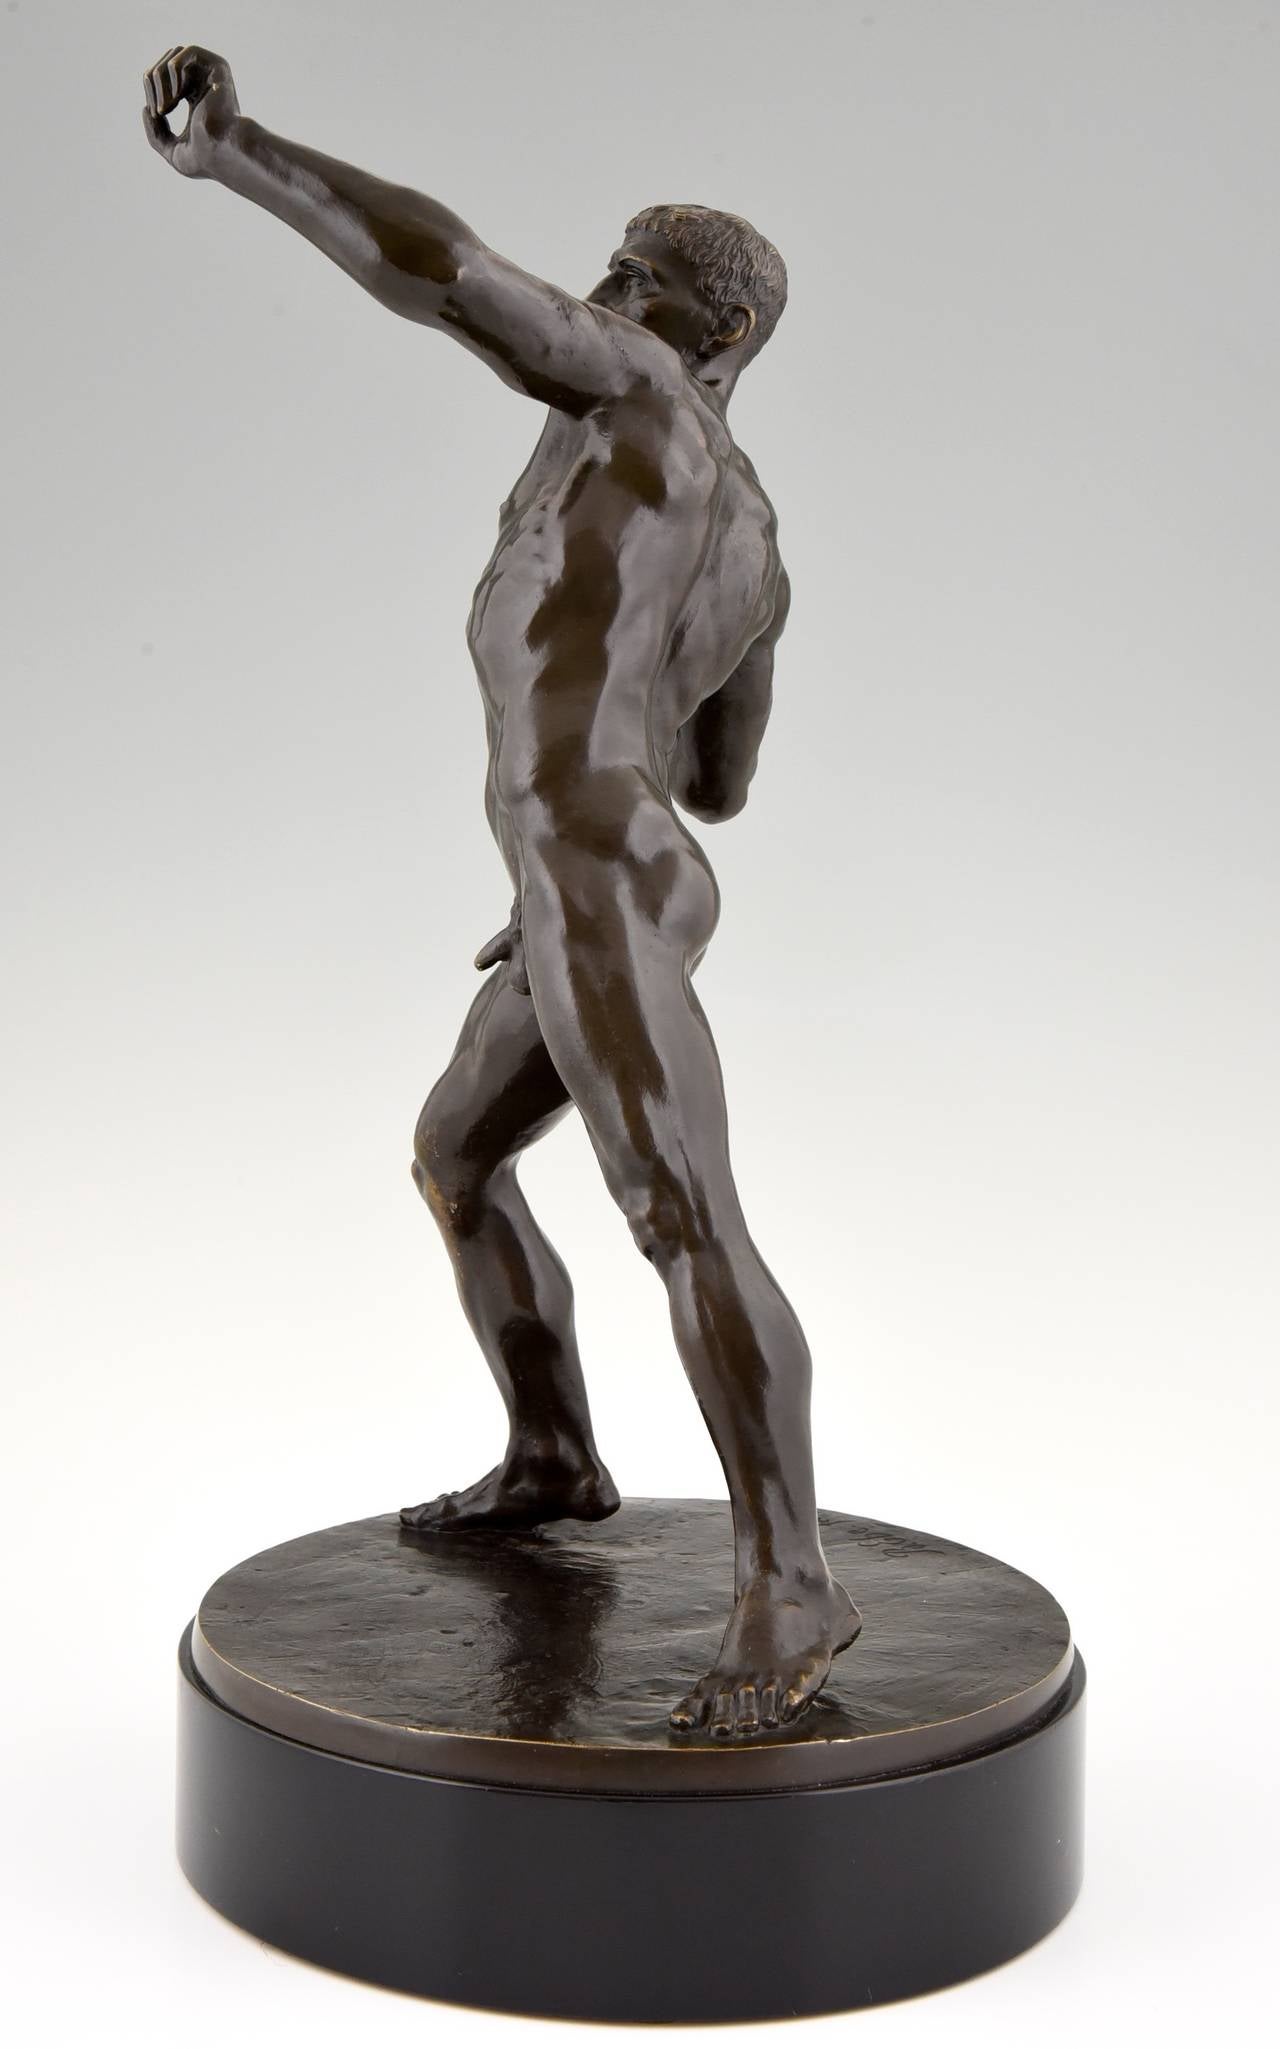 Art Deco Bronze Sculpture of a Male Nude Athlete Playing Shot Put by B. Ebe, 1930